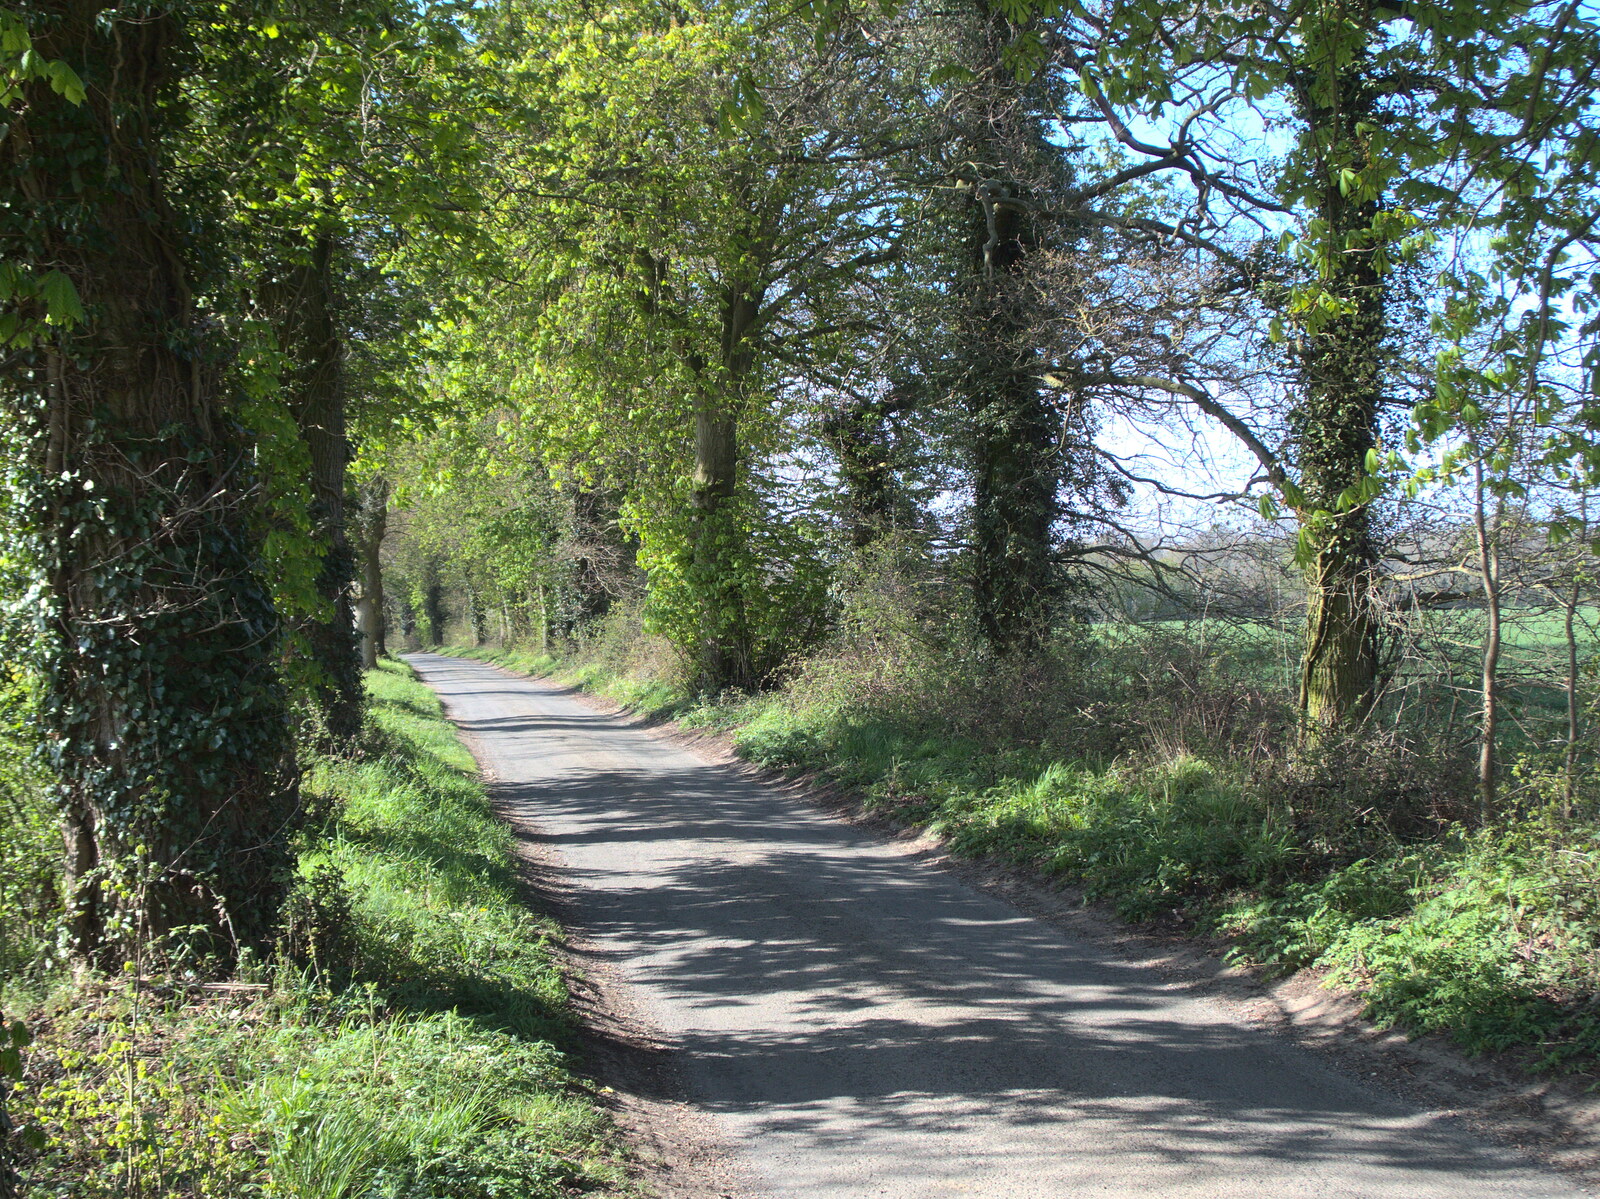 The road to Thornham from A Vaccination Afternoon, Swaffham, Norfolk - 9th May 2021